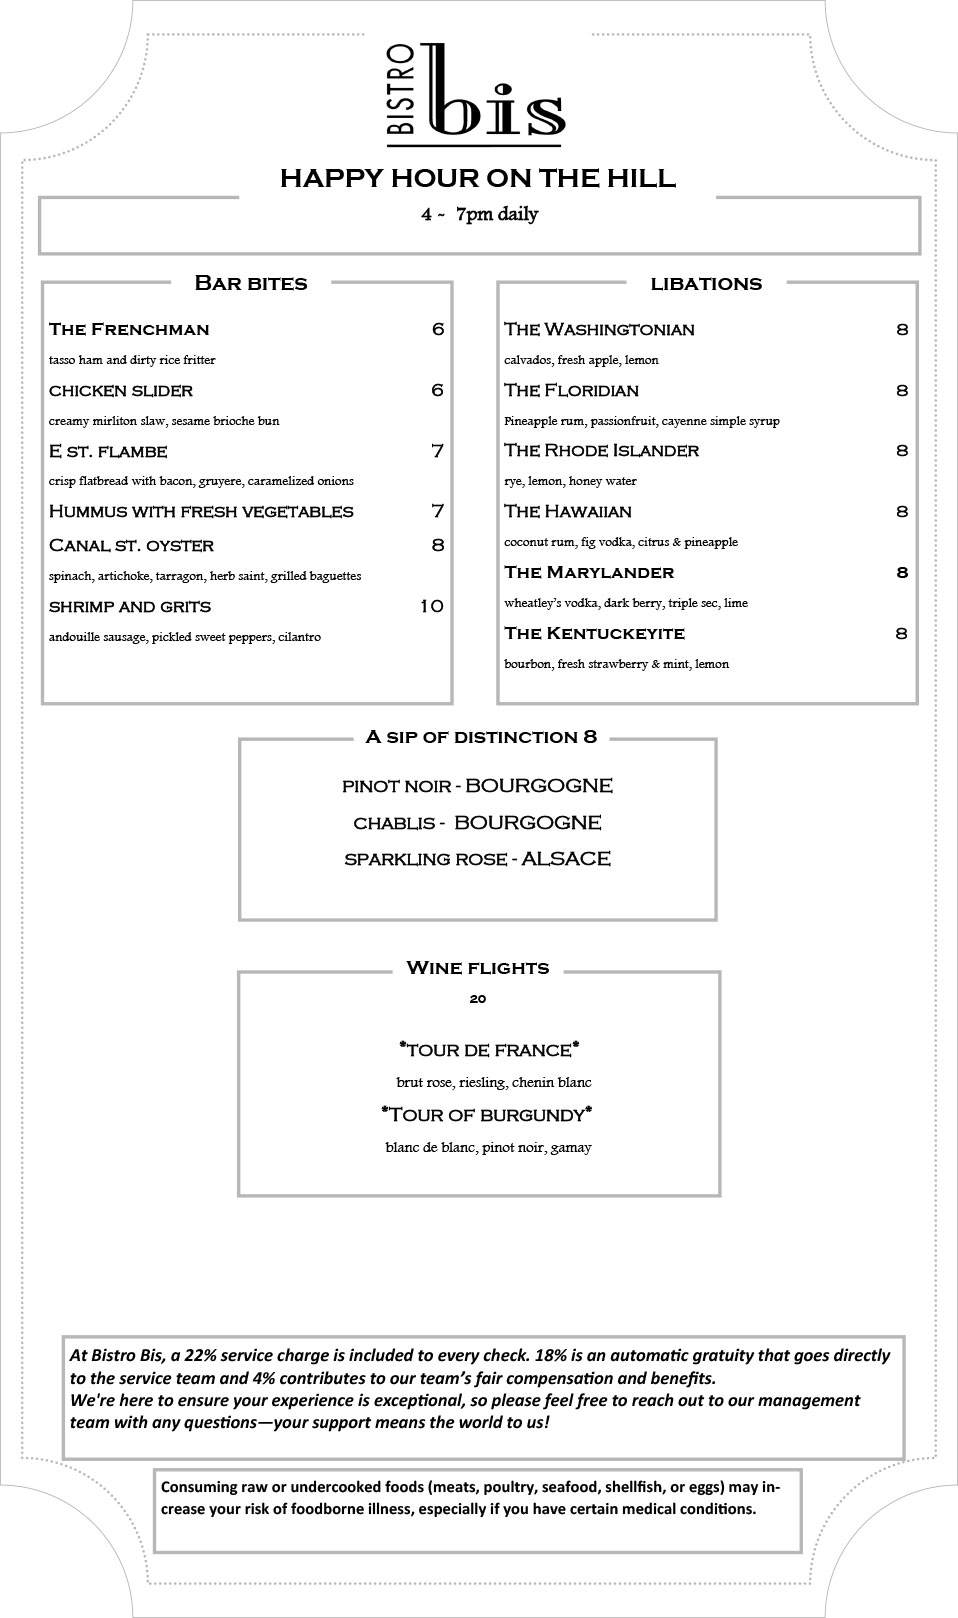 Image of Bistro Bis Happy Hour menu featuring French cuisine